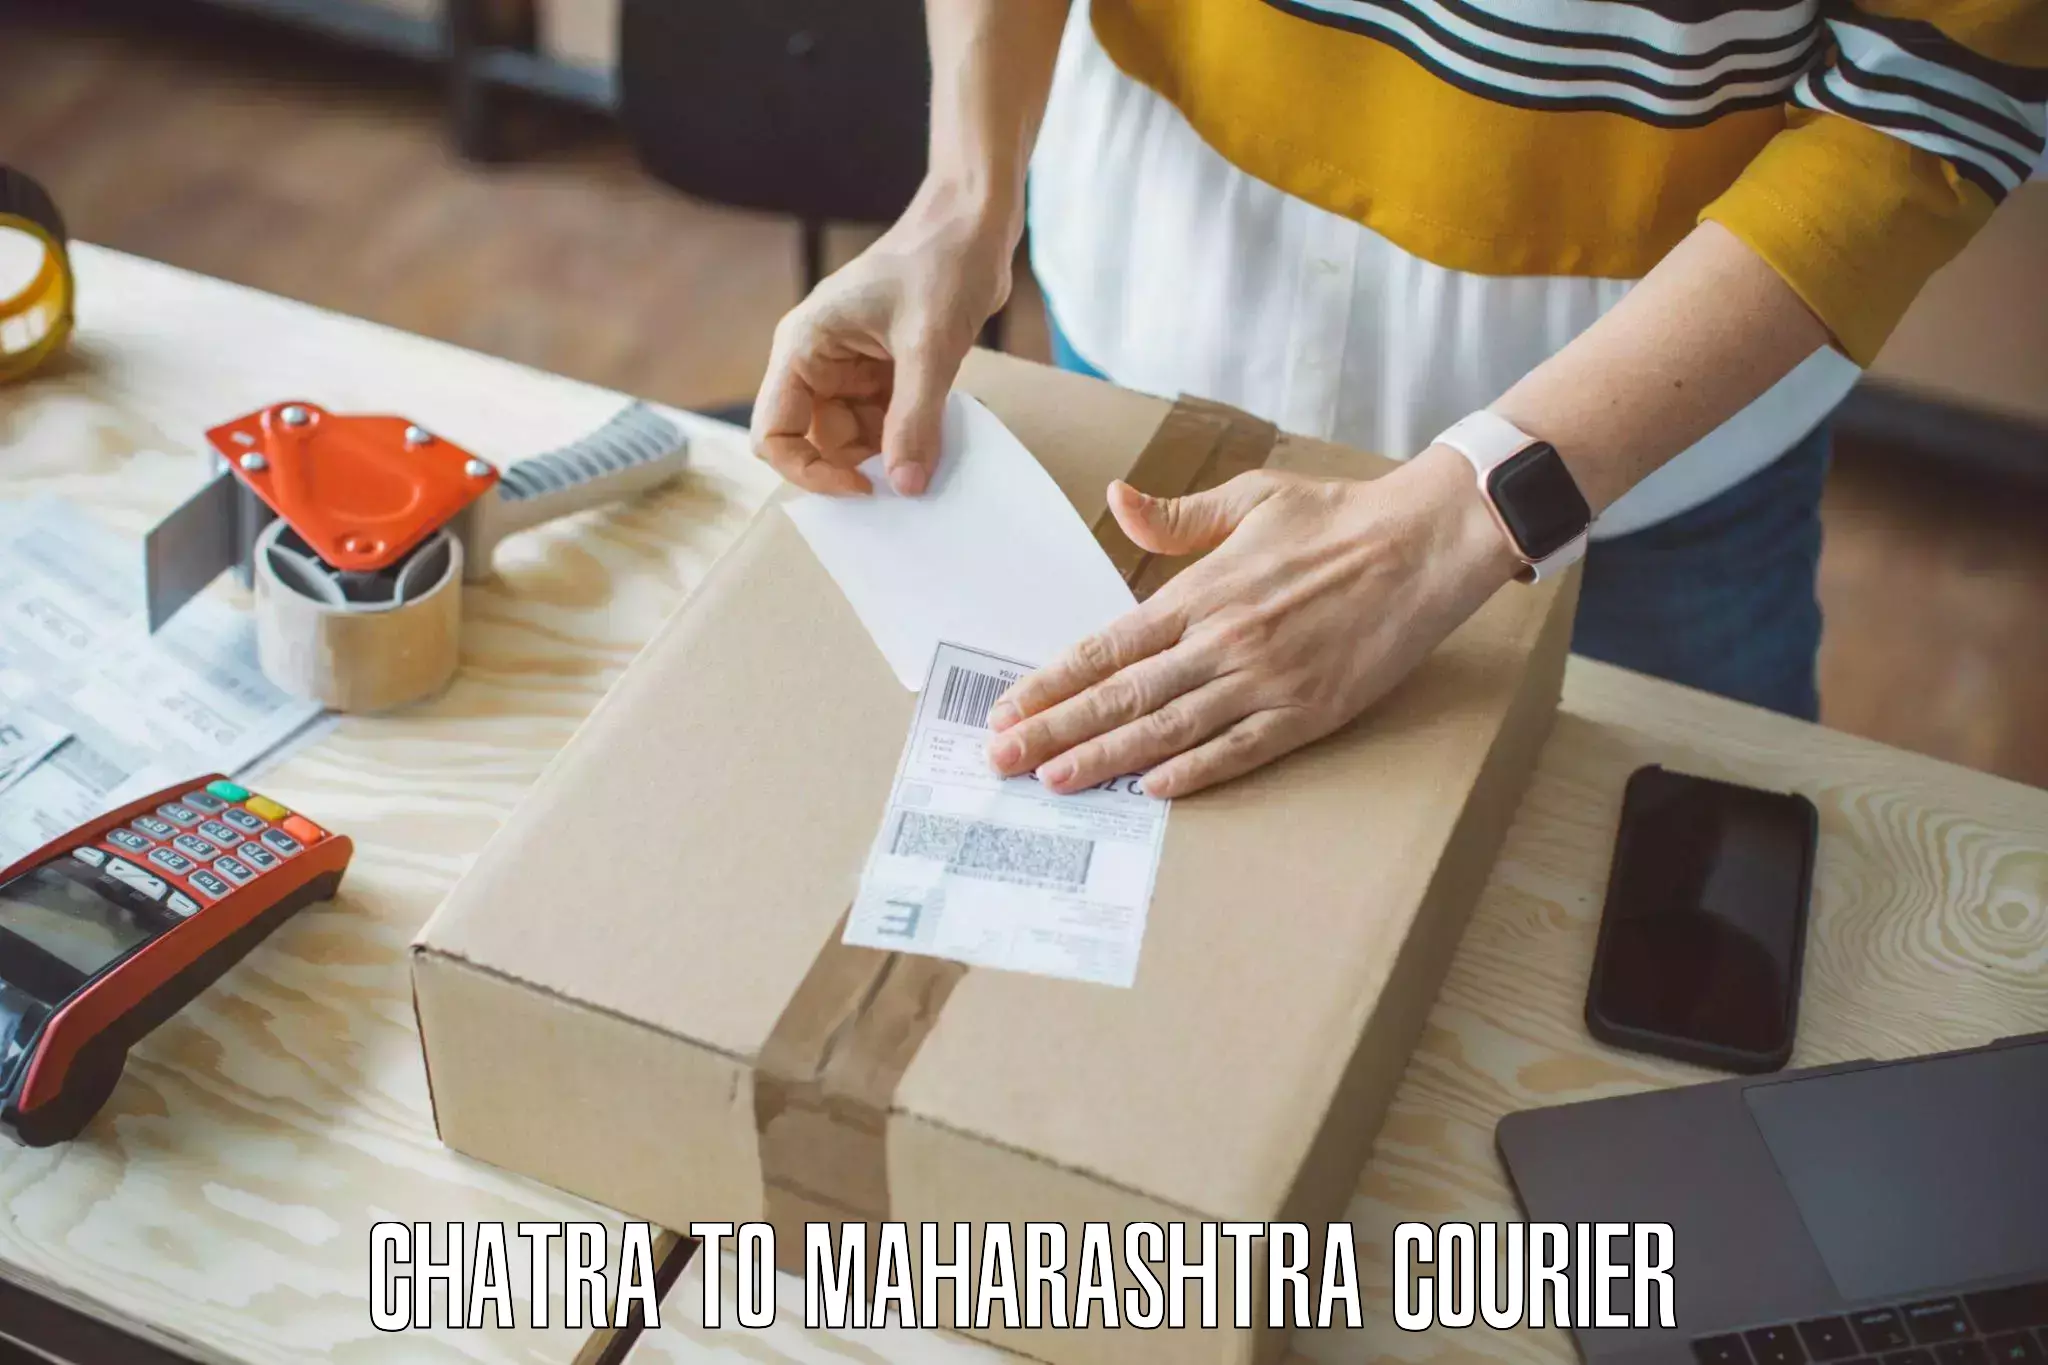 Home goods moving company in Chatra to Worli